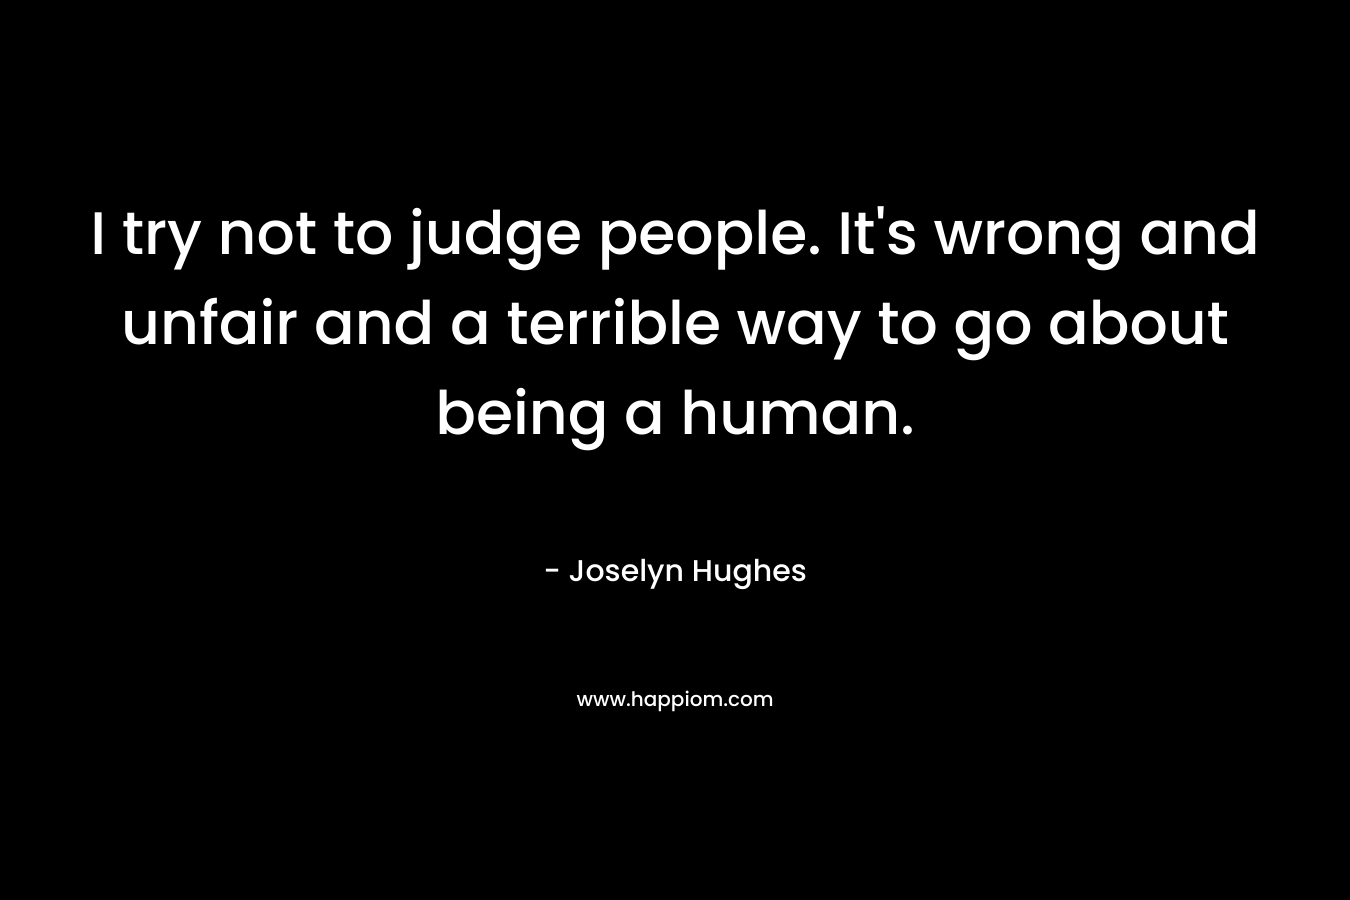 I try not to judge people. It's wrong and unfair and a terrible way to go about being a human.